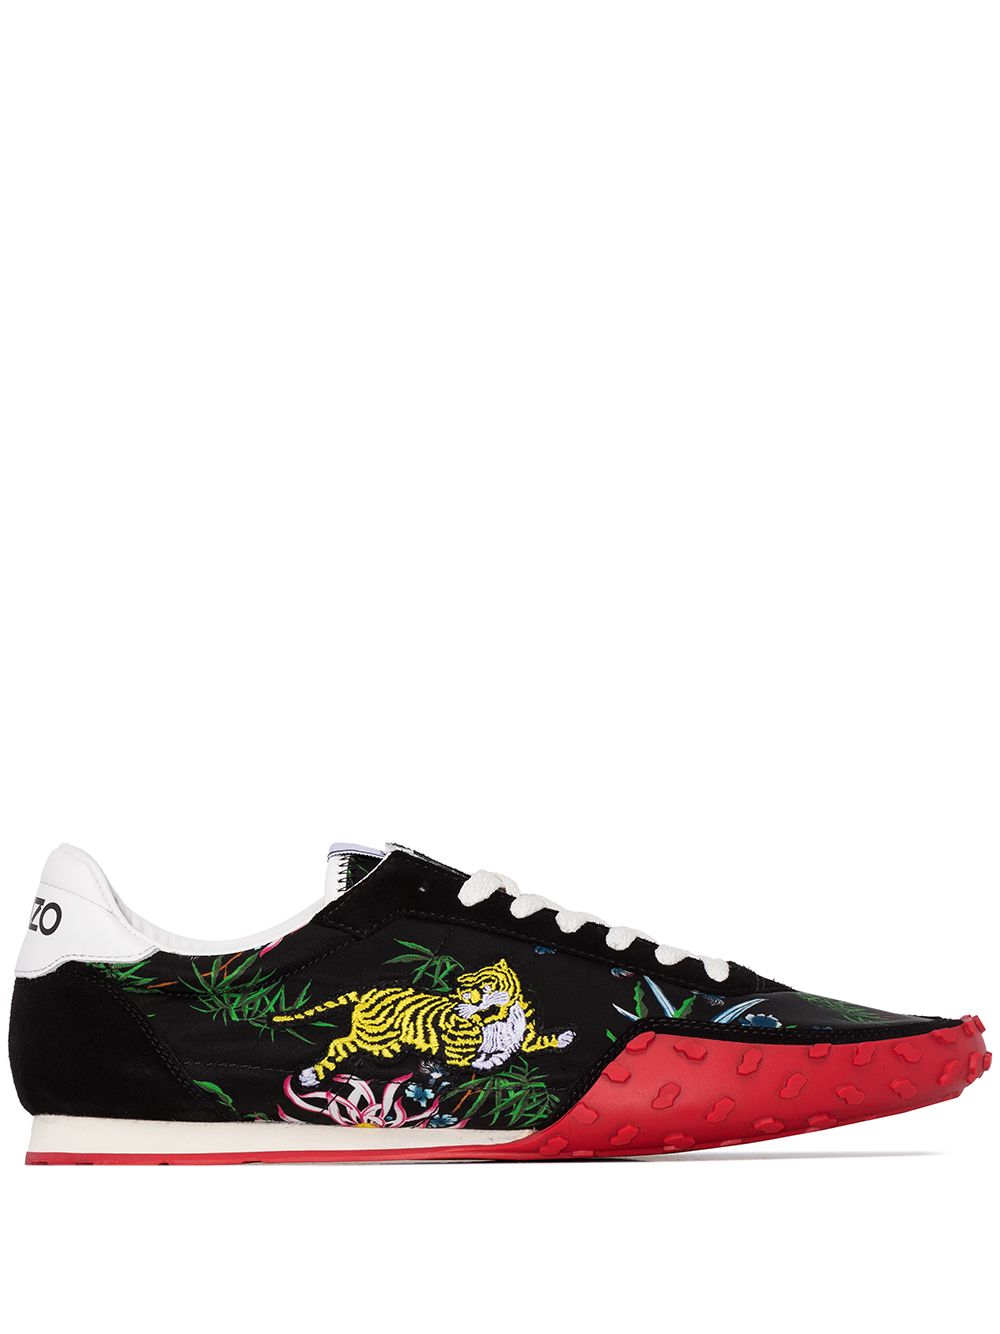 KENZO MOVE LOW TOP TIGER SNEAKERS